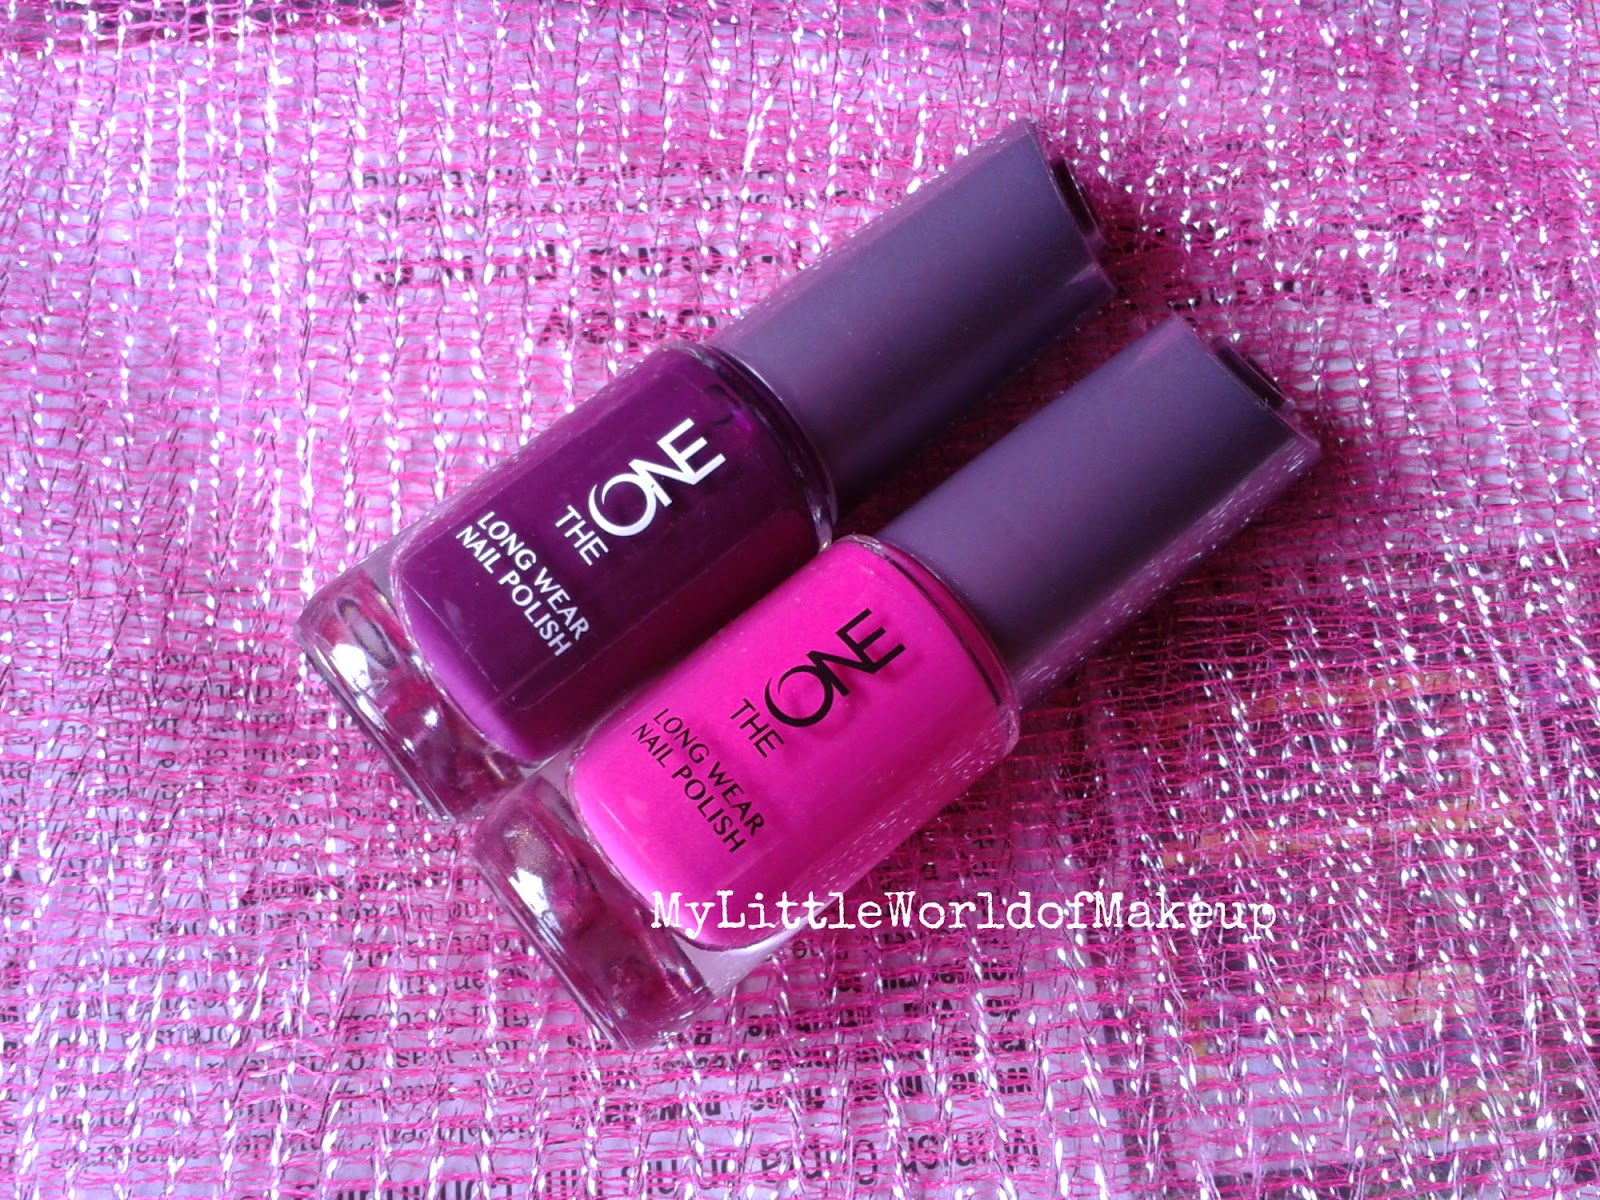 Oriflame The One Long Wear Nail Polish in Purple in Paris and Night Orchid  Review